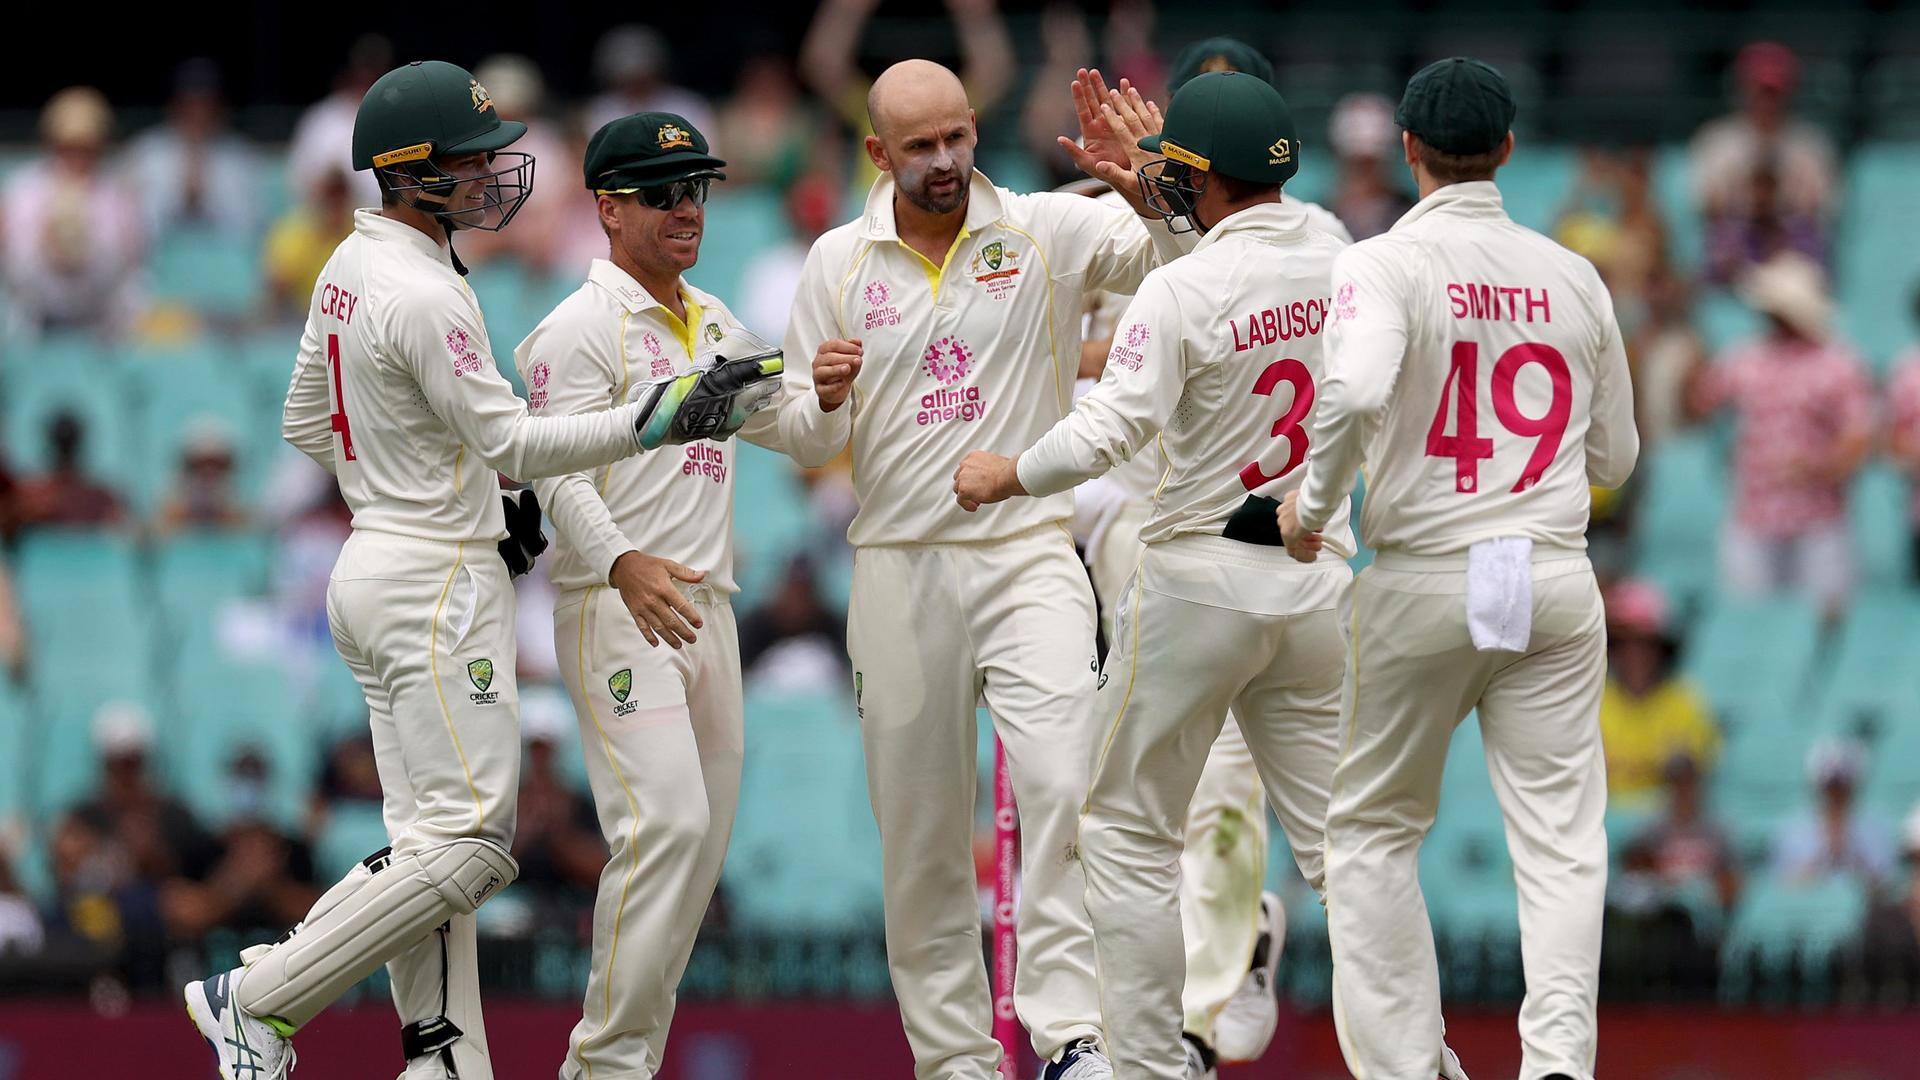 Australia vs South Africa, Tests: Here is the statistical preview